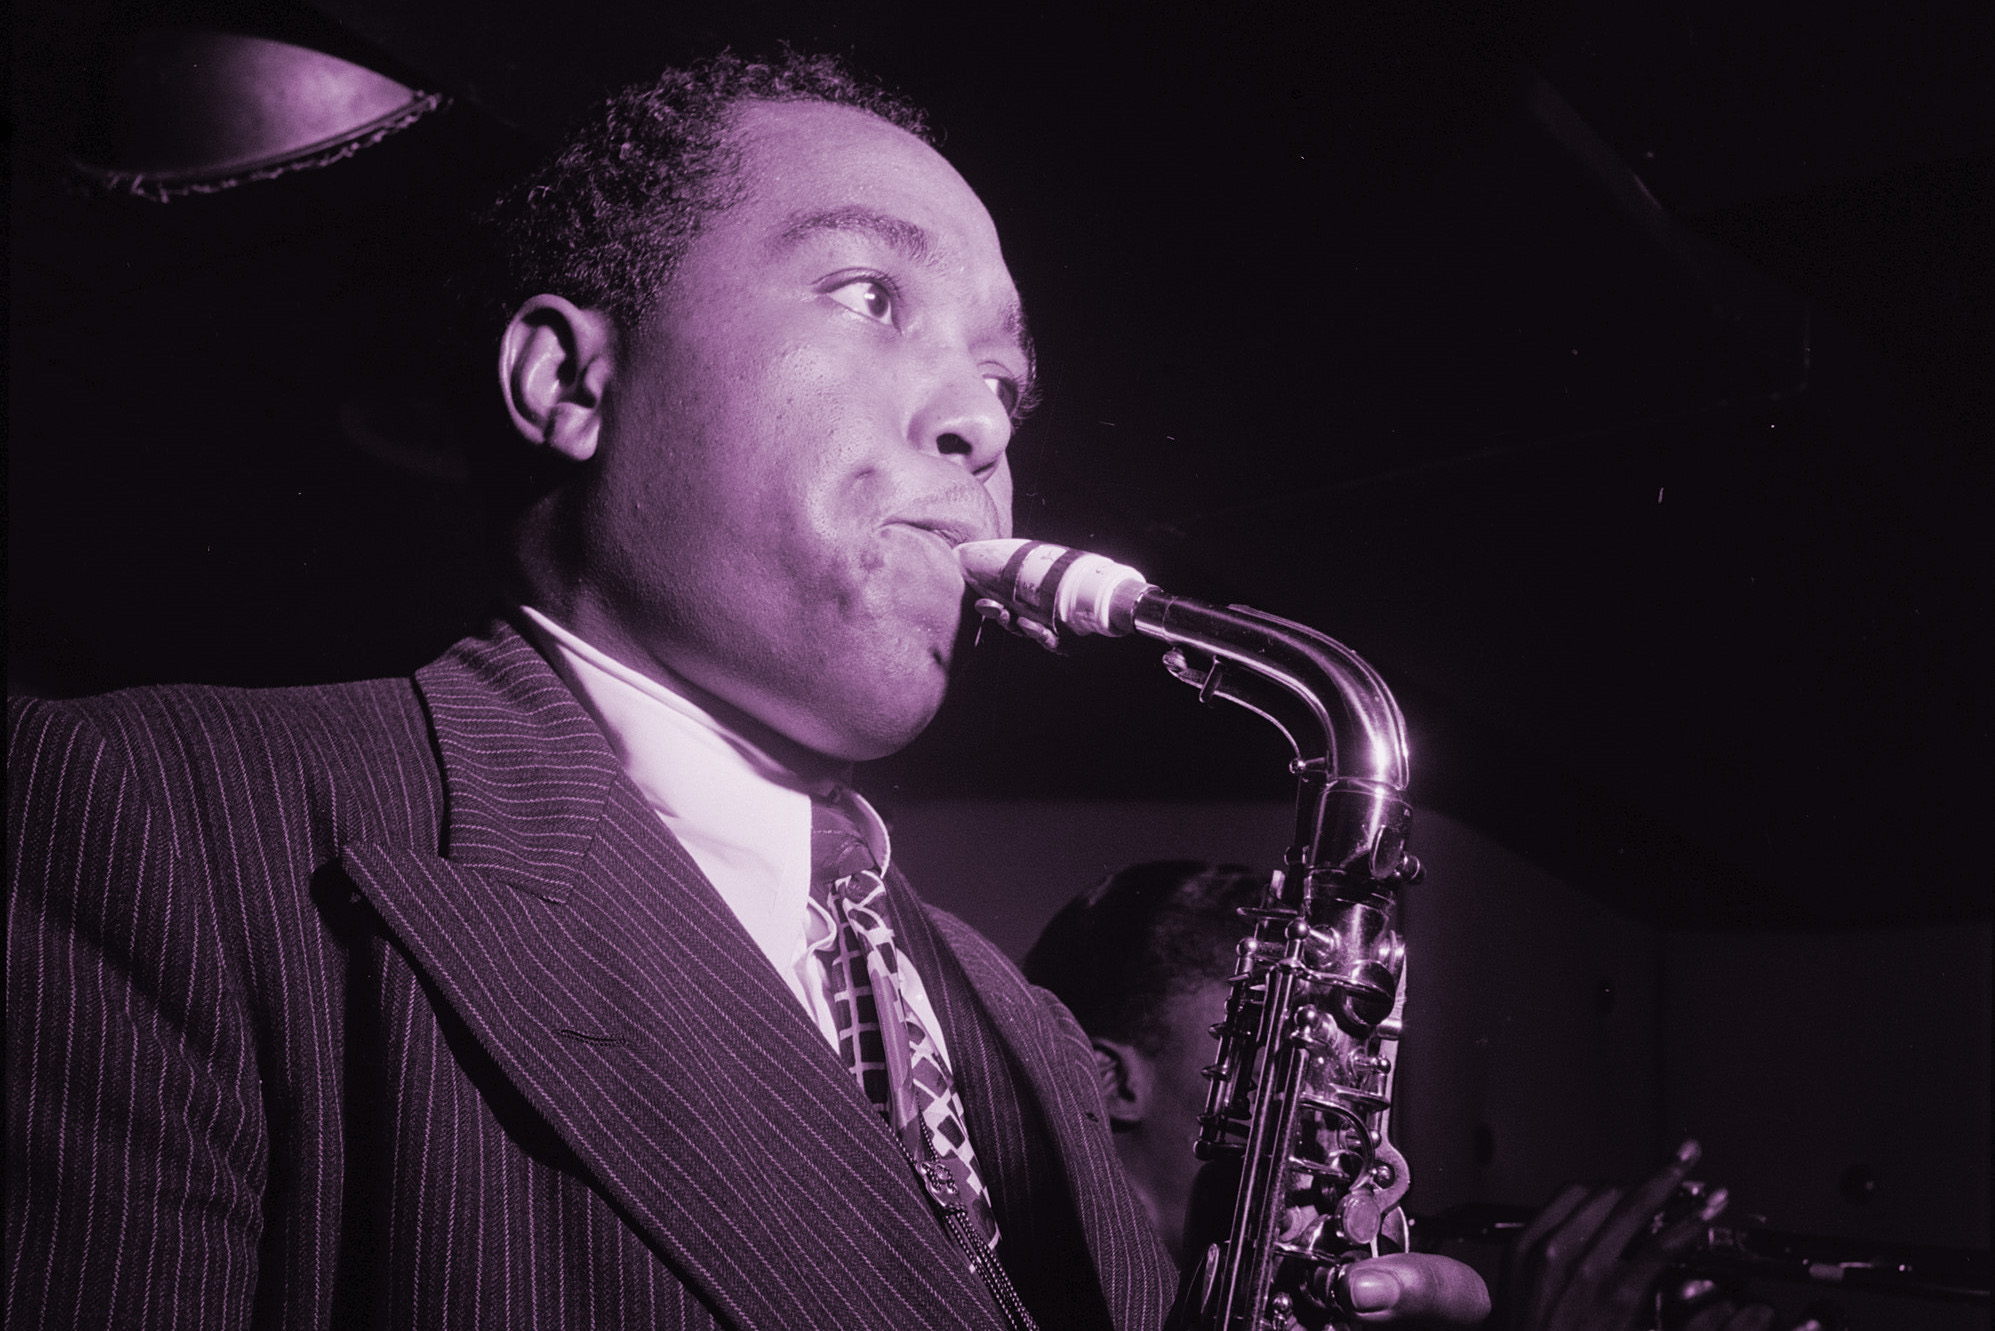 50 great moments in jazz: Charlie Parker's first recordings